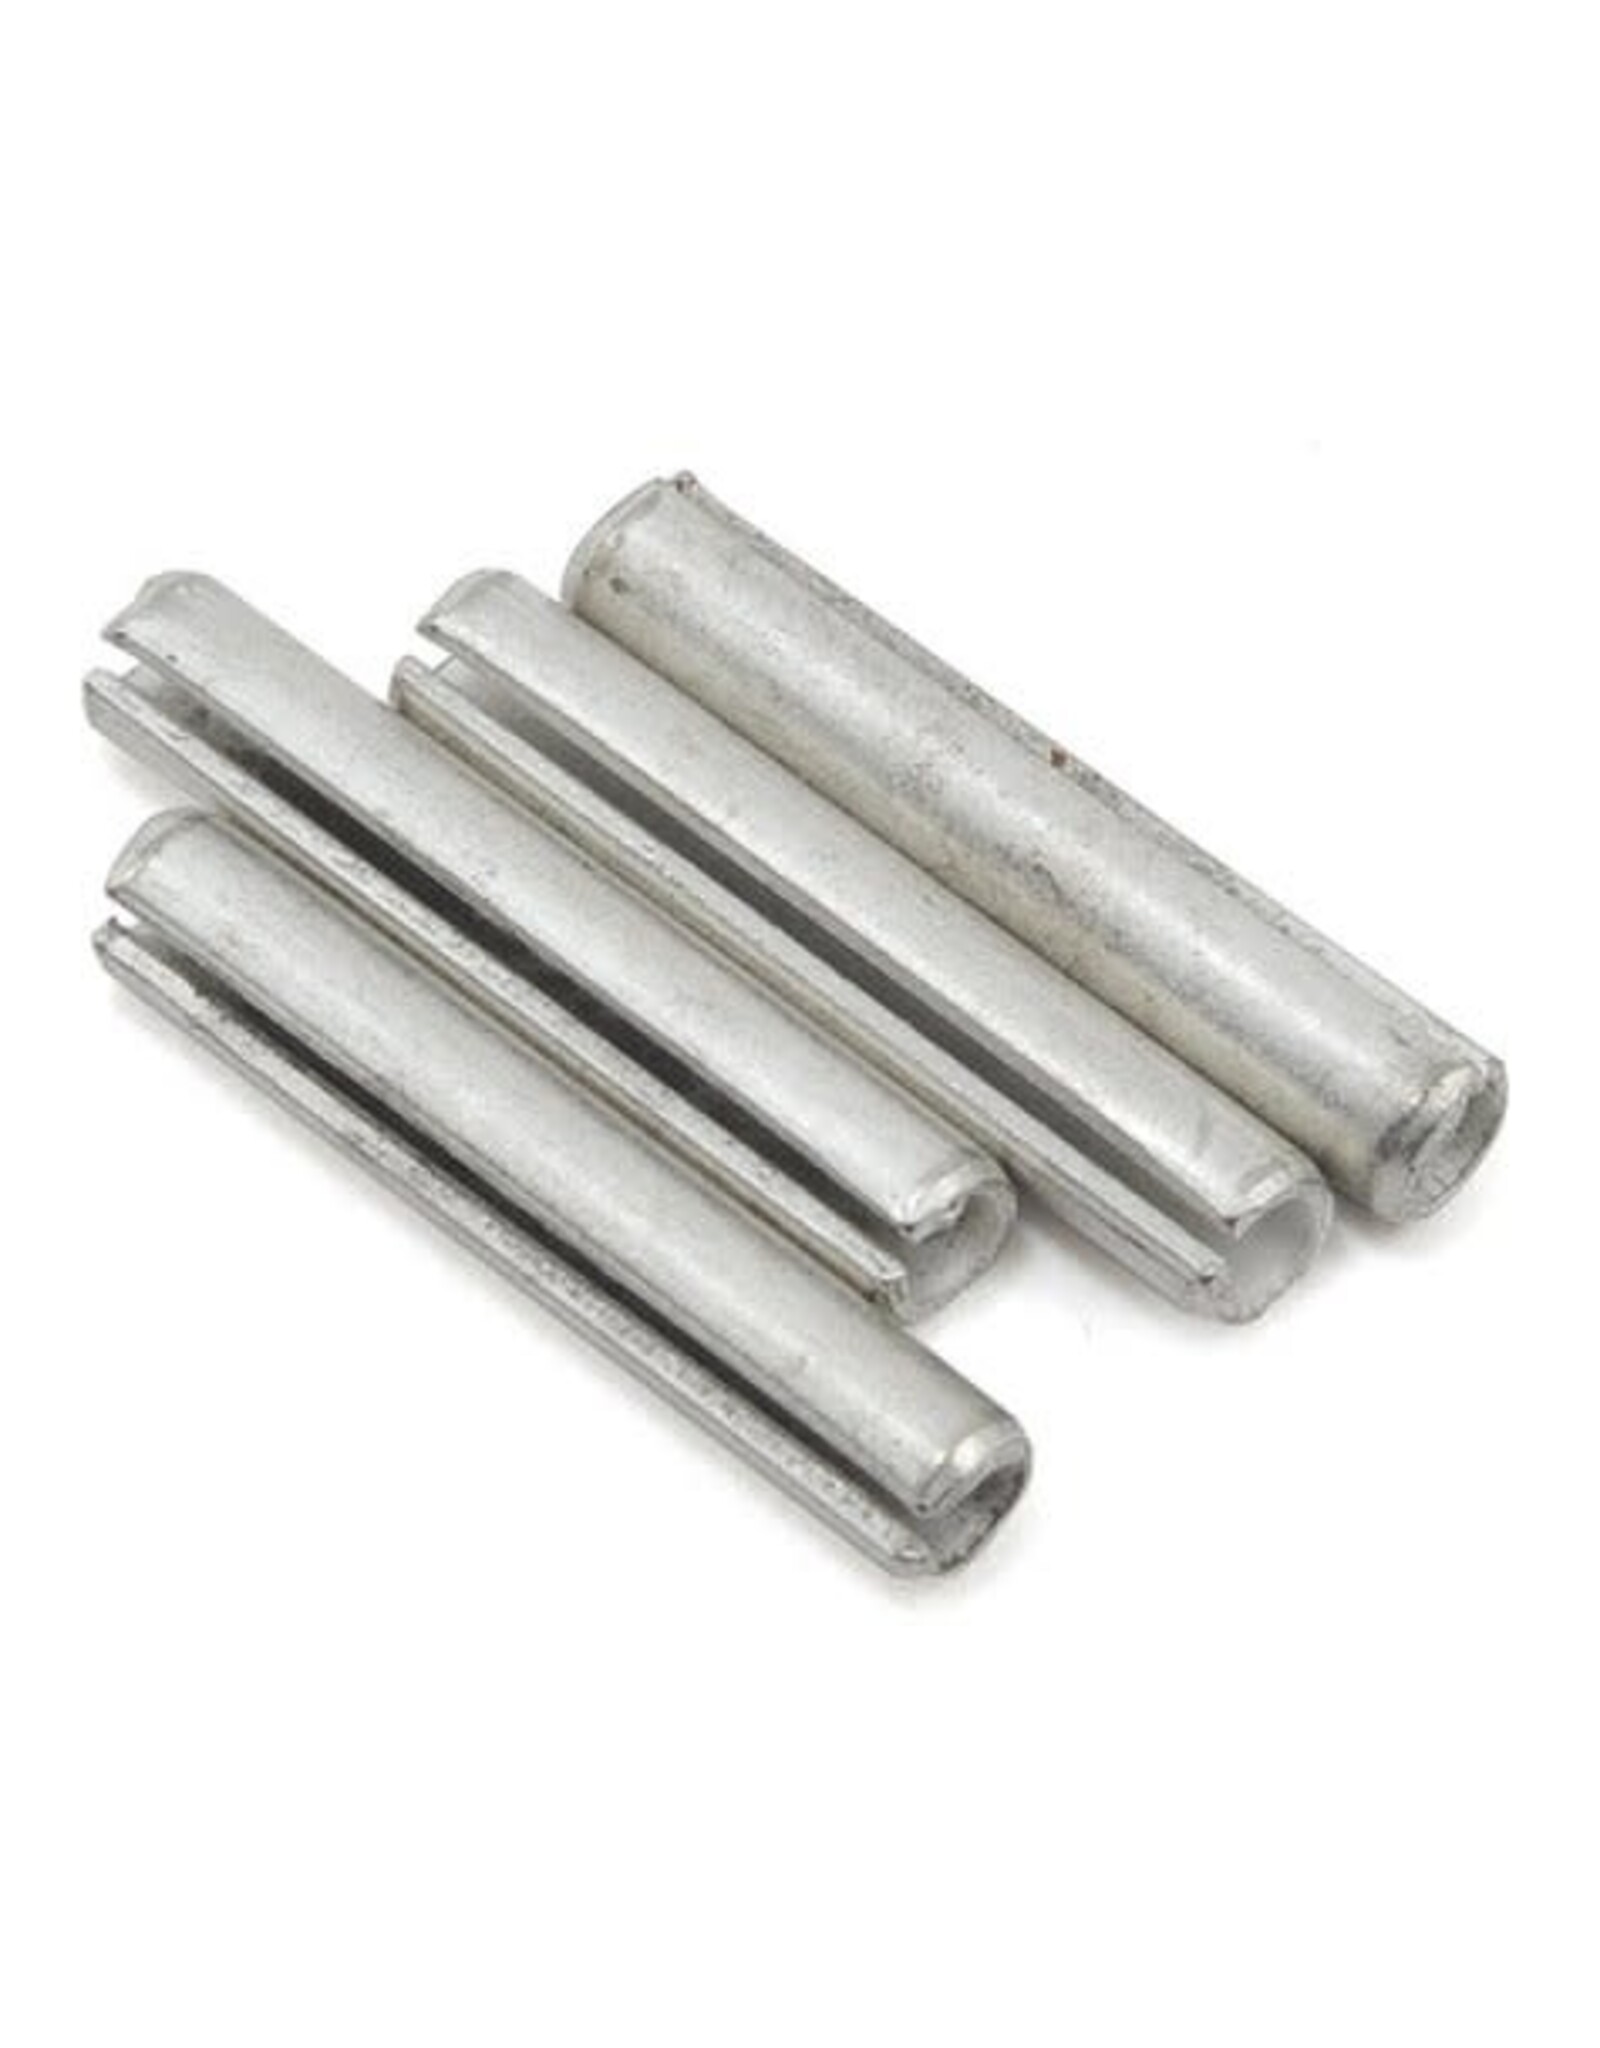 Dubro Split Coupling Sleeves for .062 to .078 WIRE